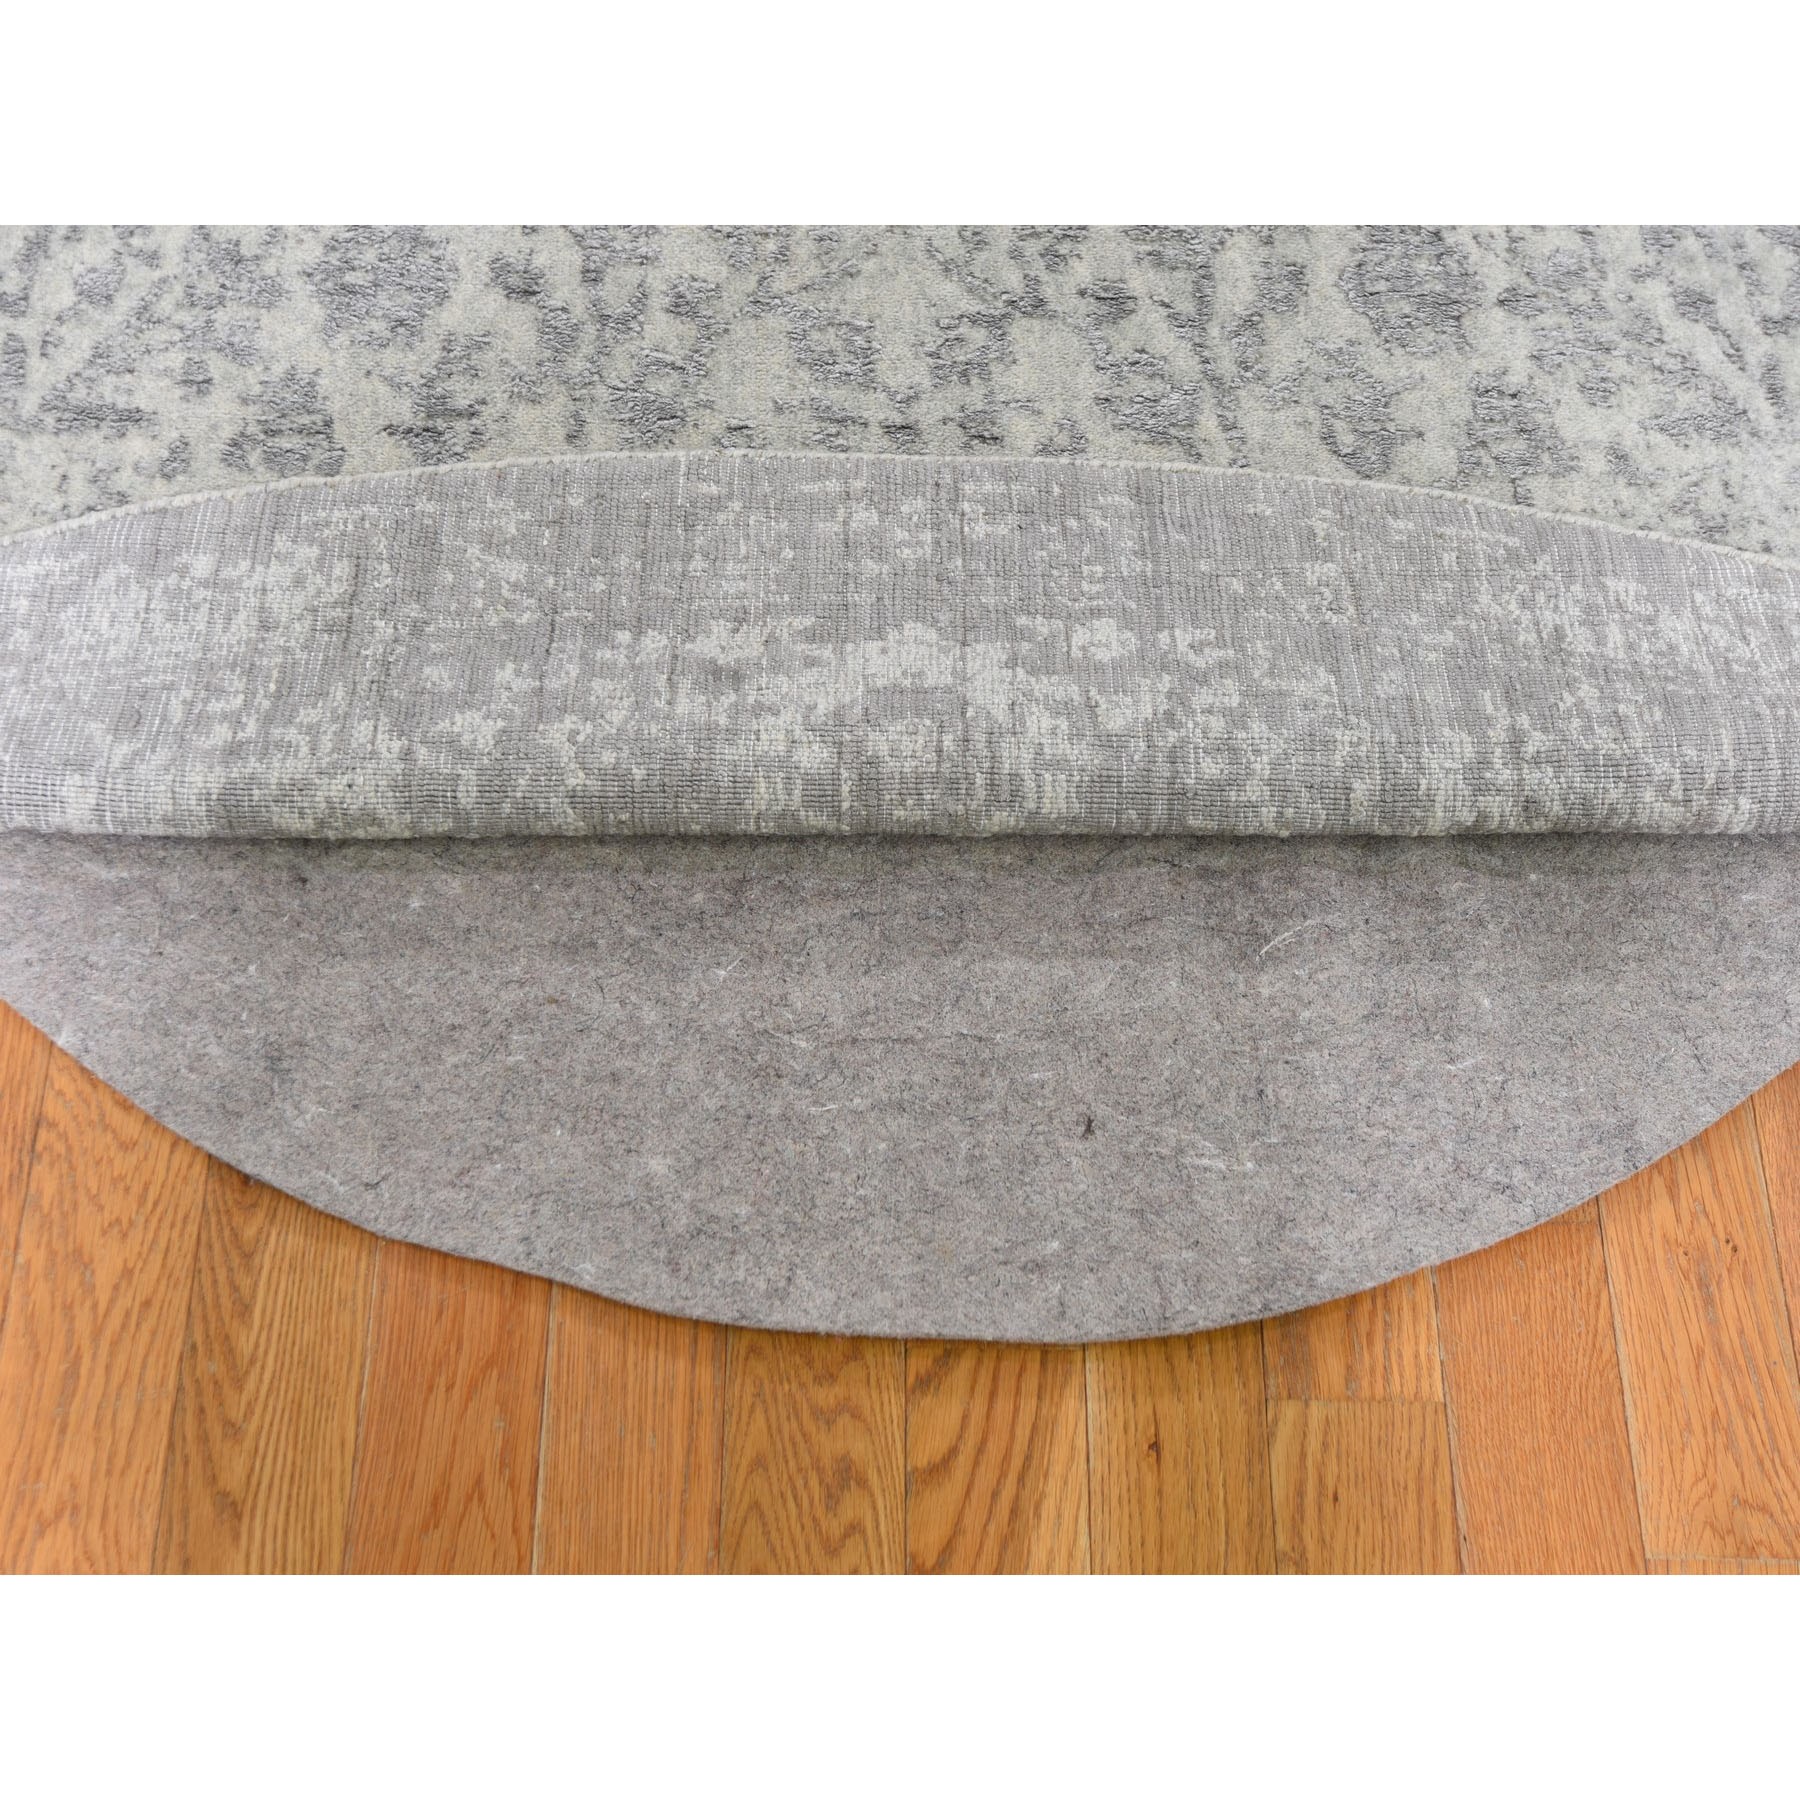 10-x10- jacquard Hand Loomed Gray Broken Cypress Tree Design Wool And Silk Thick And Plush Round Oriental Rug 